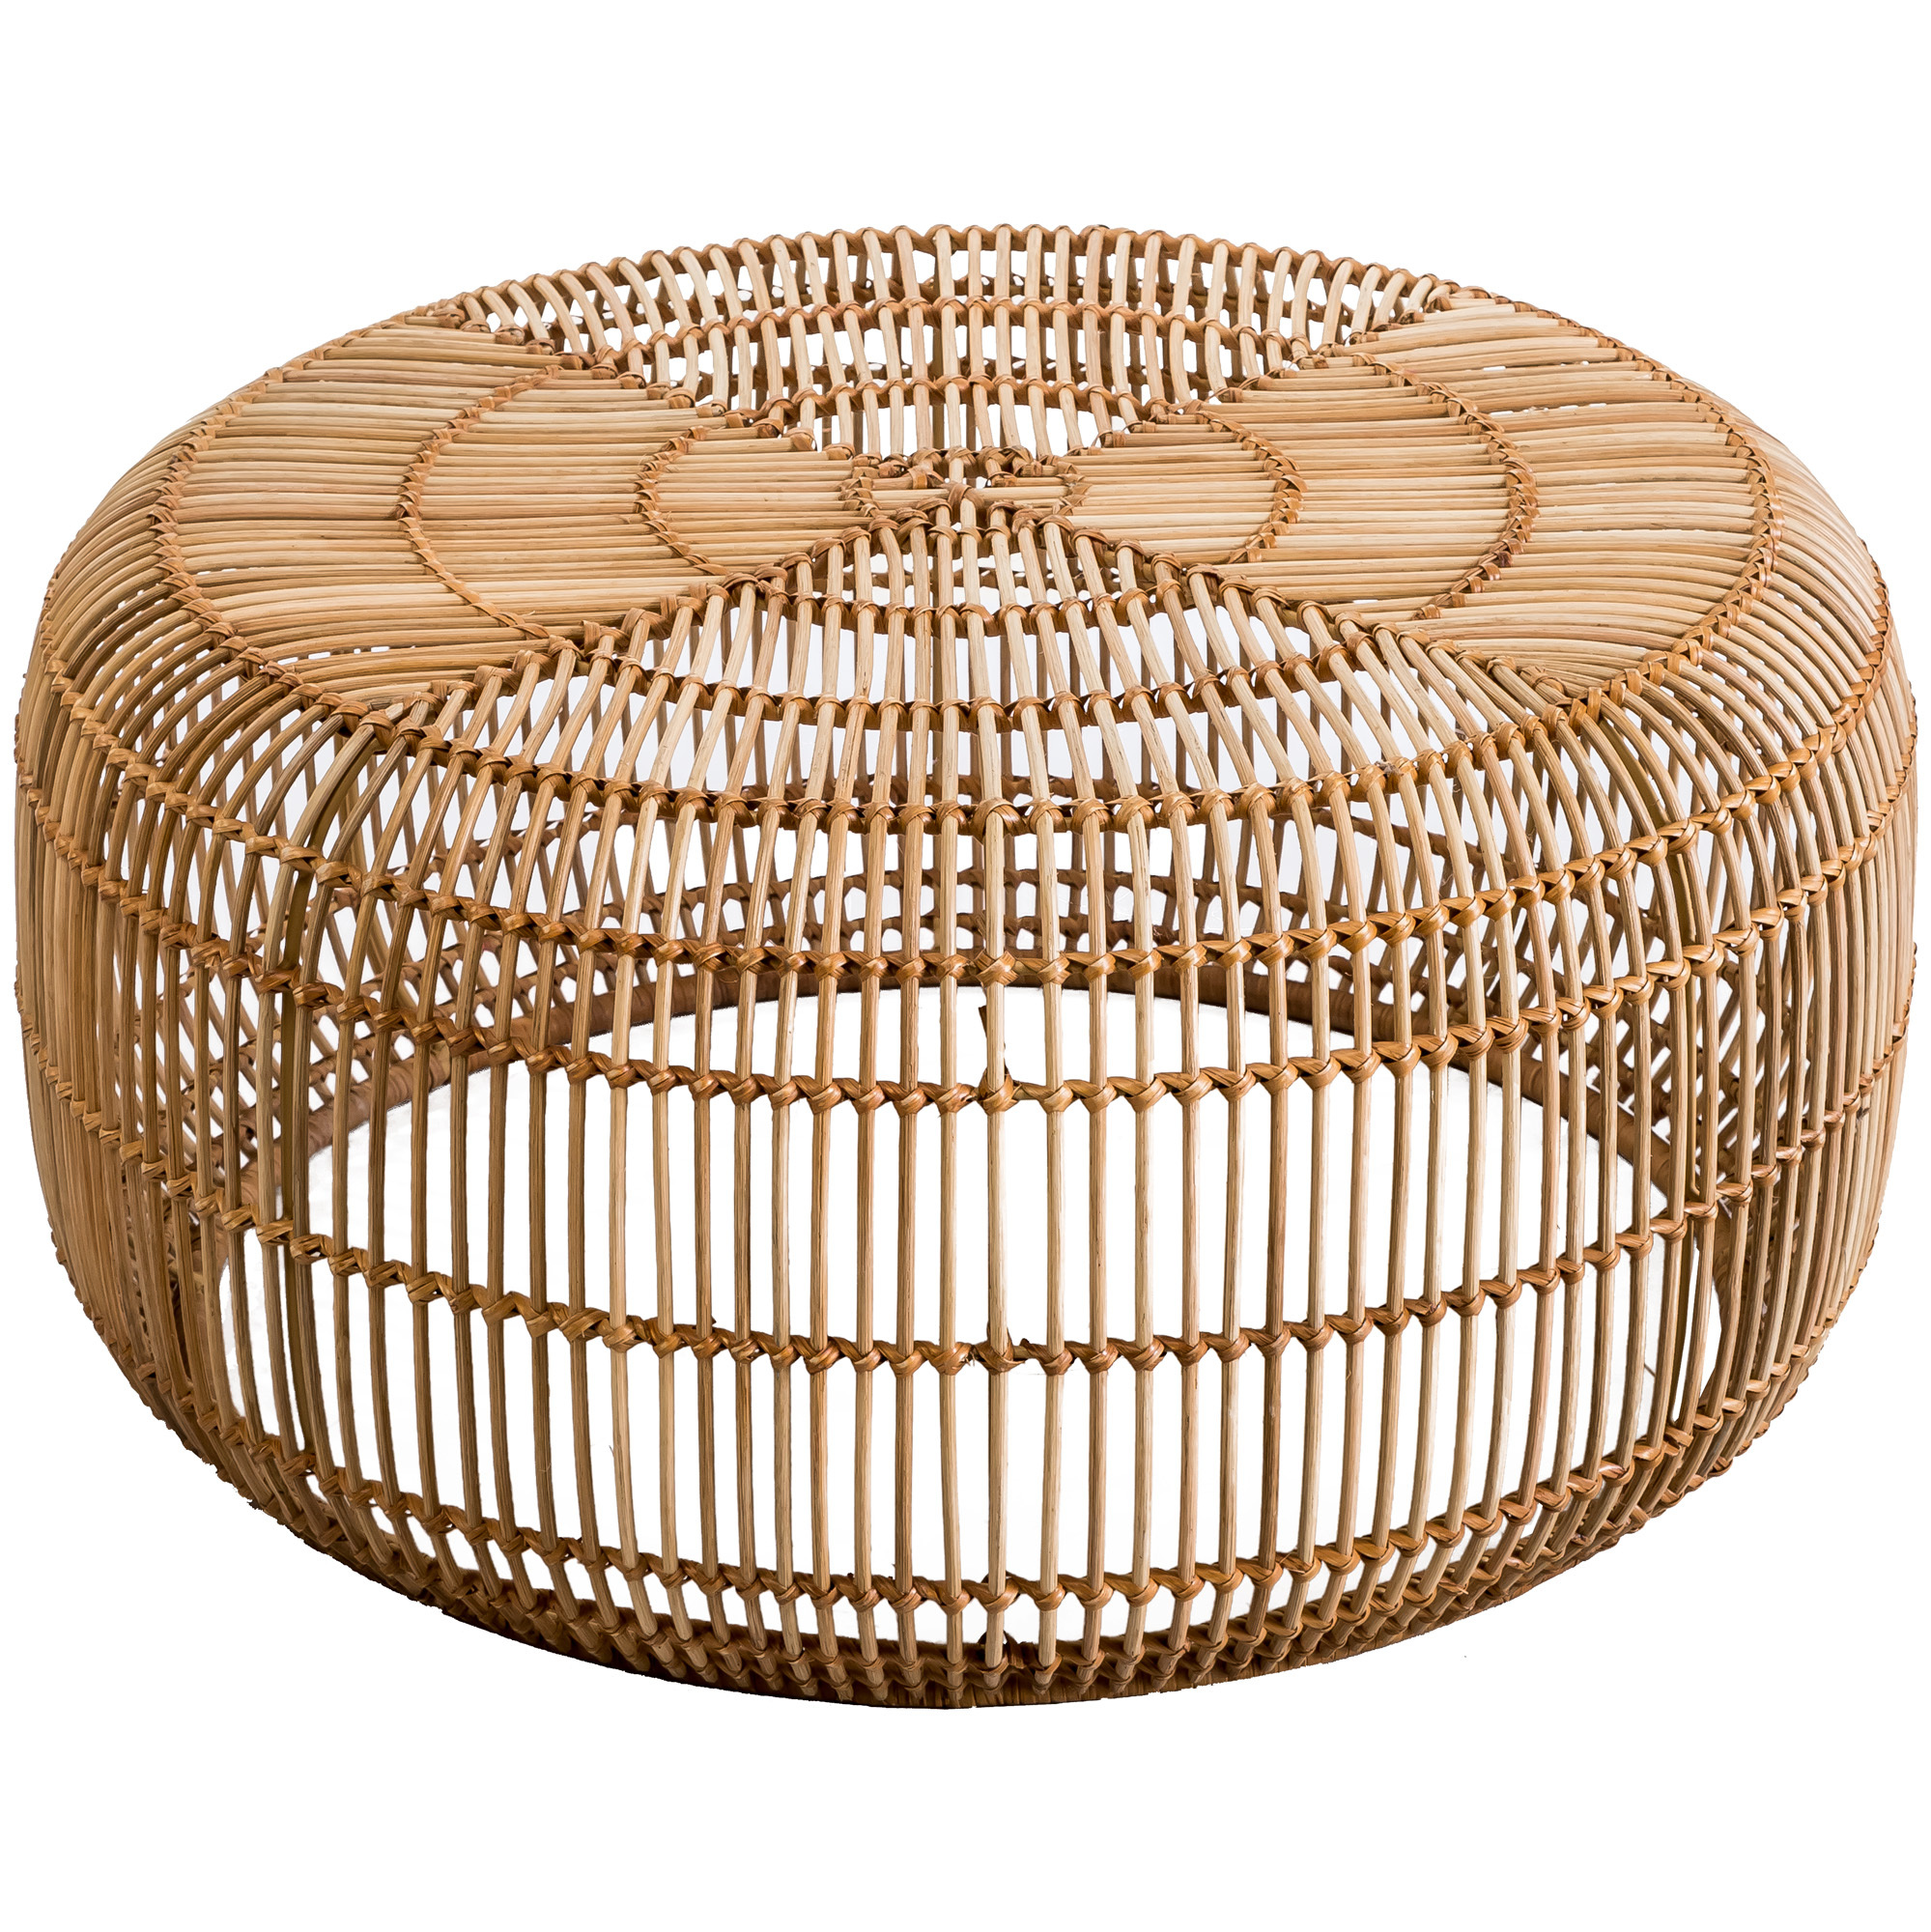 Rustic Natural Round Coffee Table With Storage Shelf For Living Room Easy Assembly Round Health Smart Homes